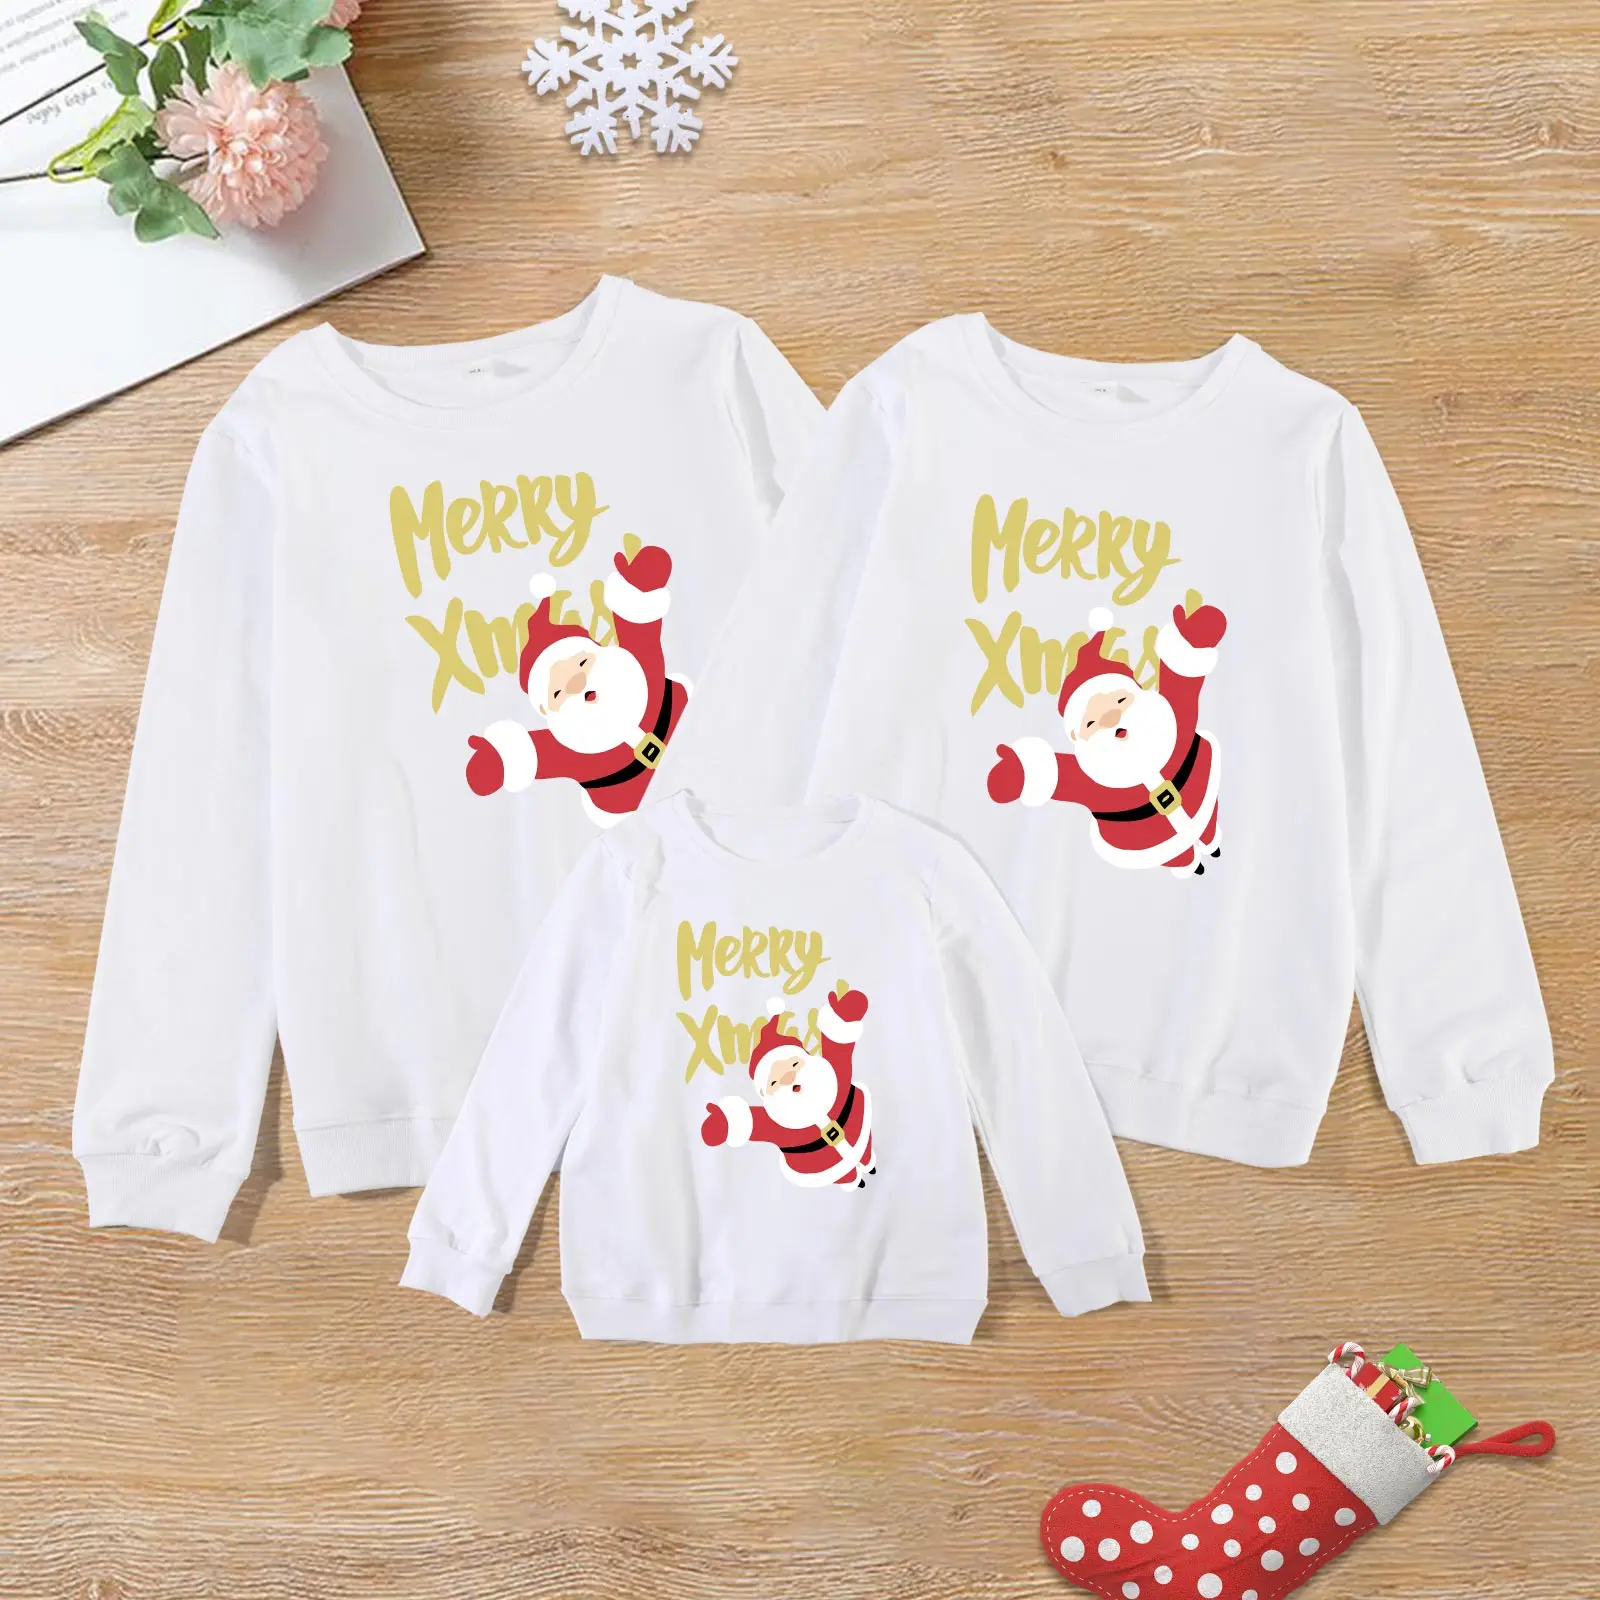 

Christmas Sweaters Family Matching Outfits Santa Claus Father Mother & Children Cotton Sweatshirts Mommy and Me Xmas Clothes